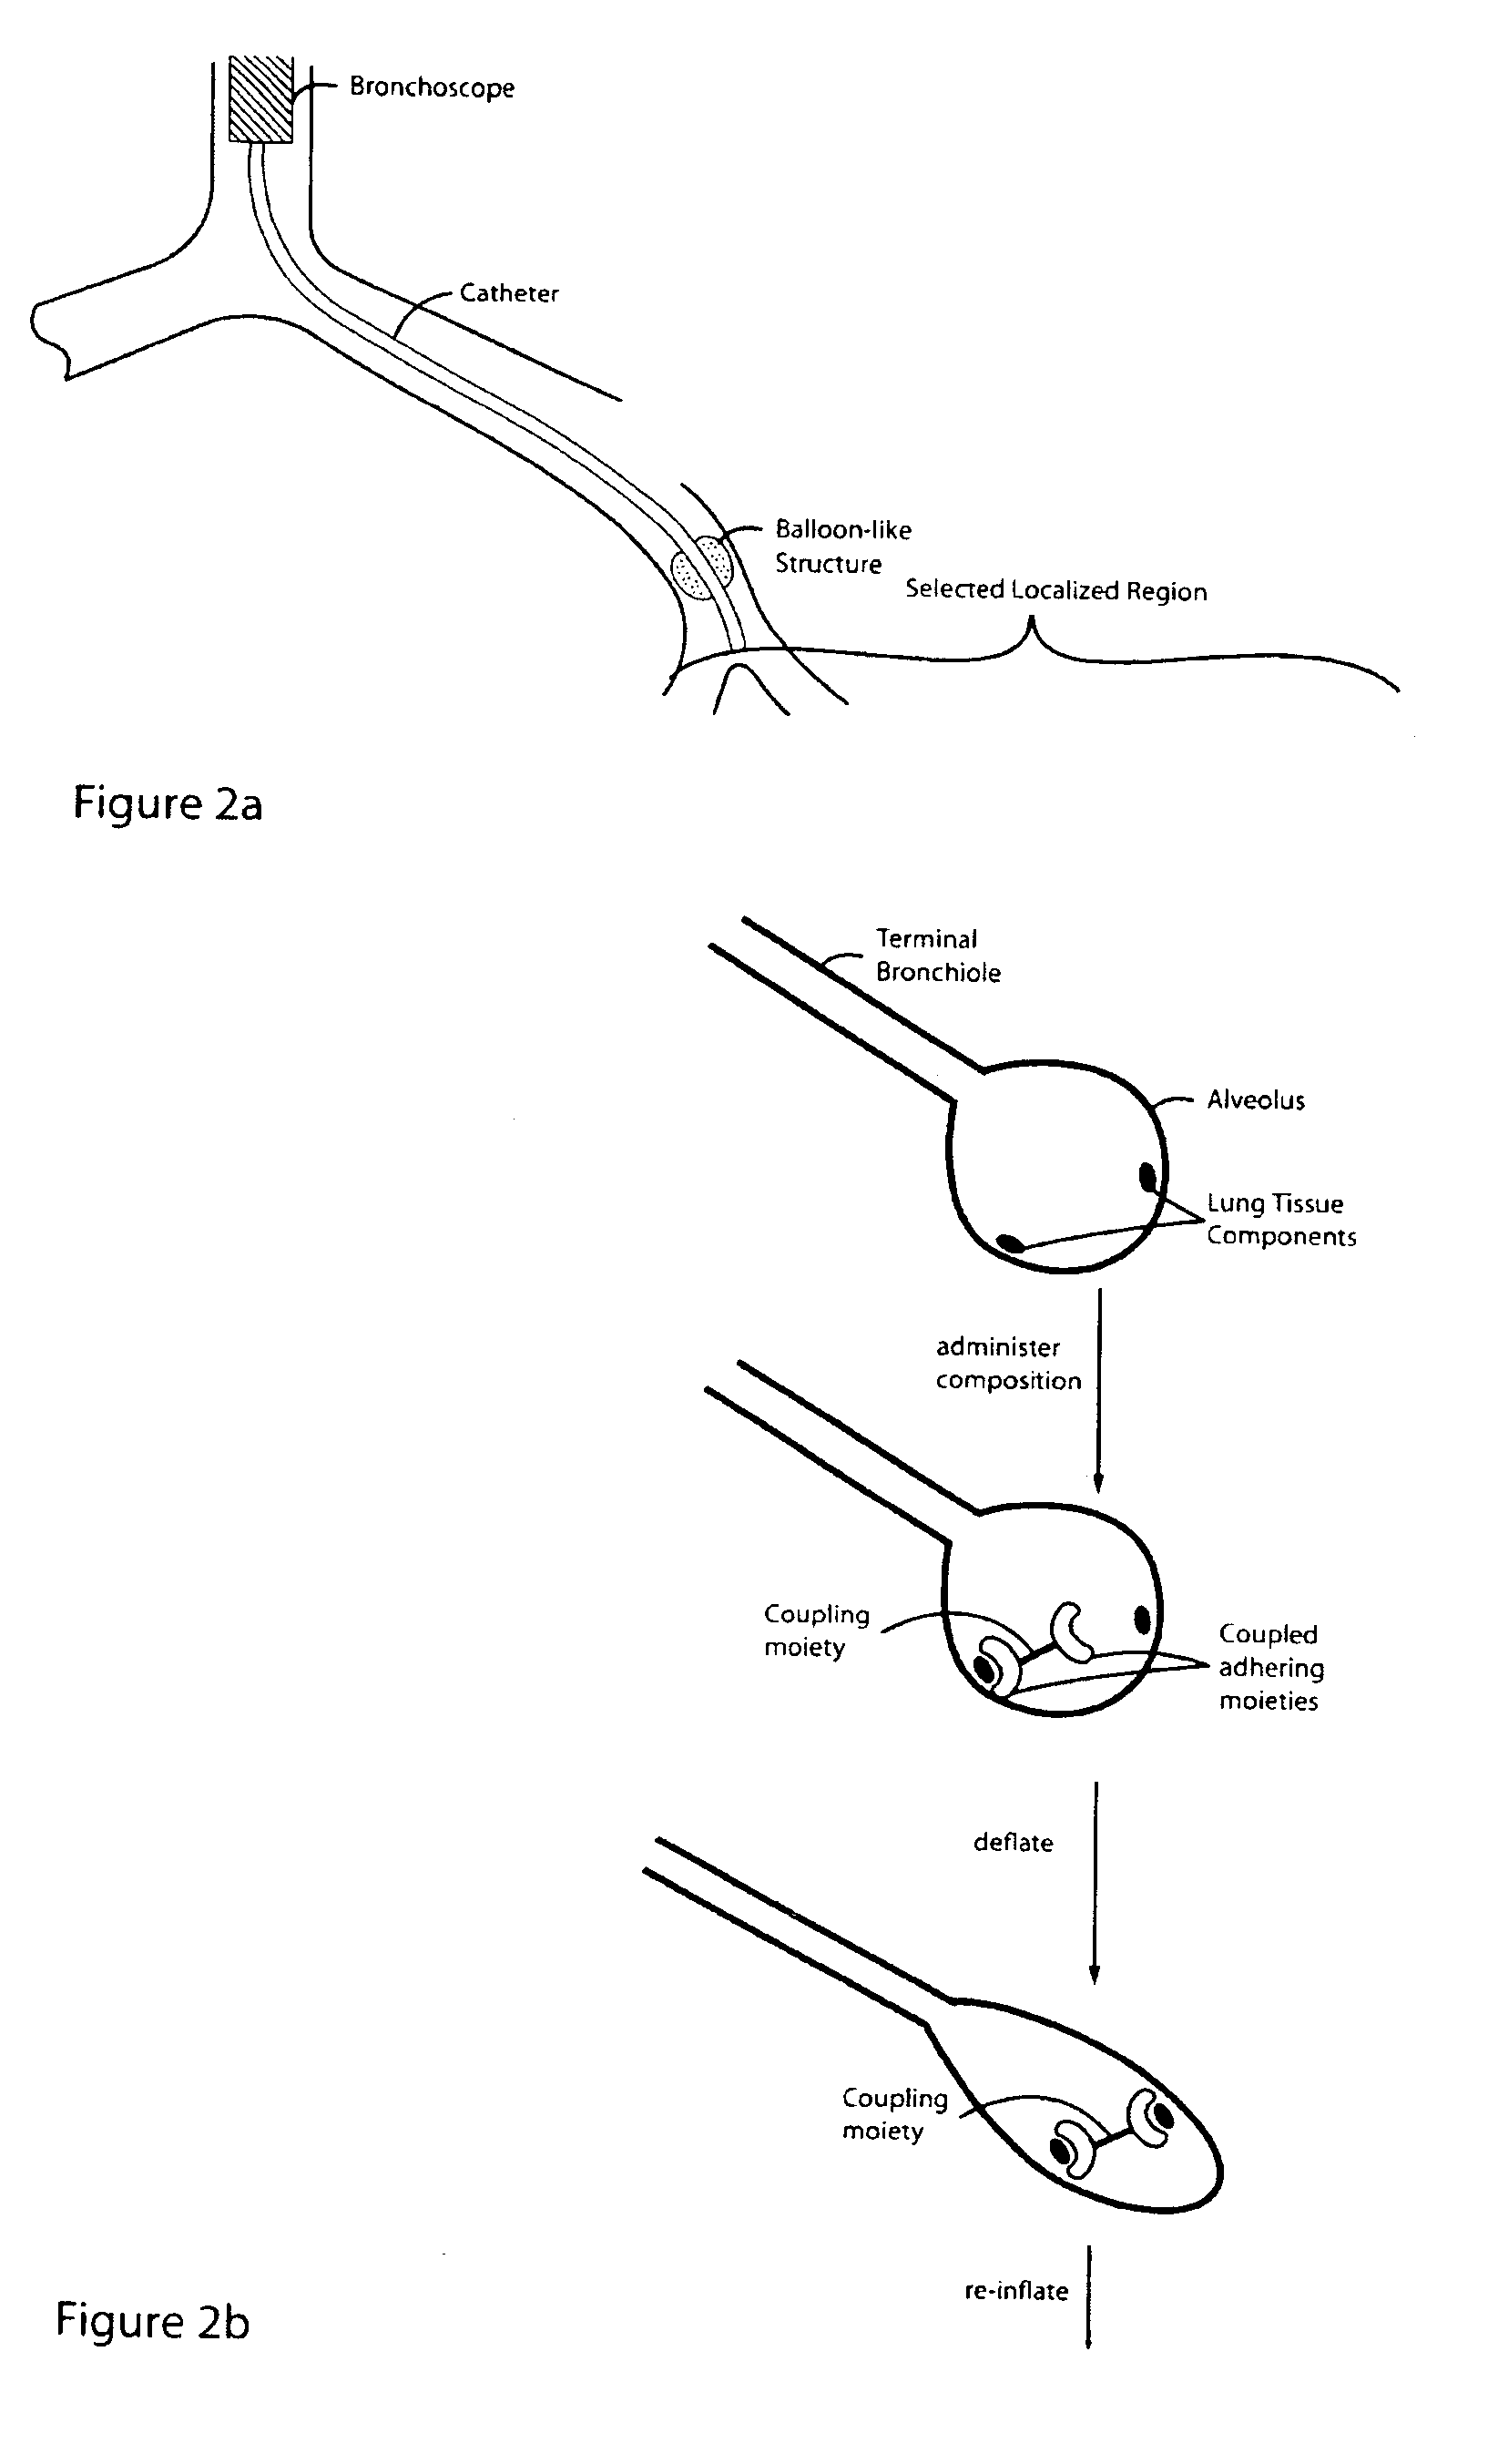 Lung volume reduction using glue compositions